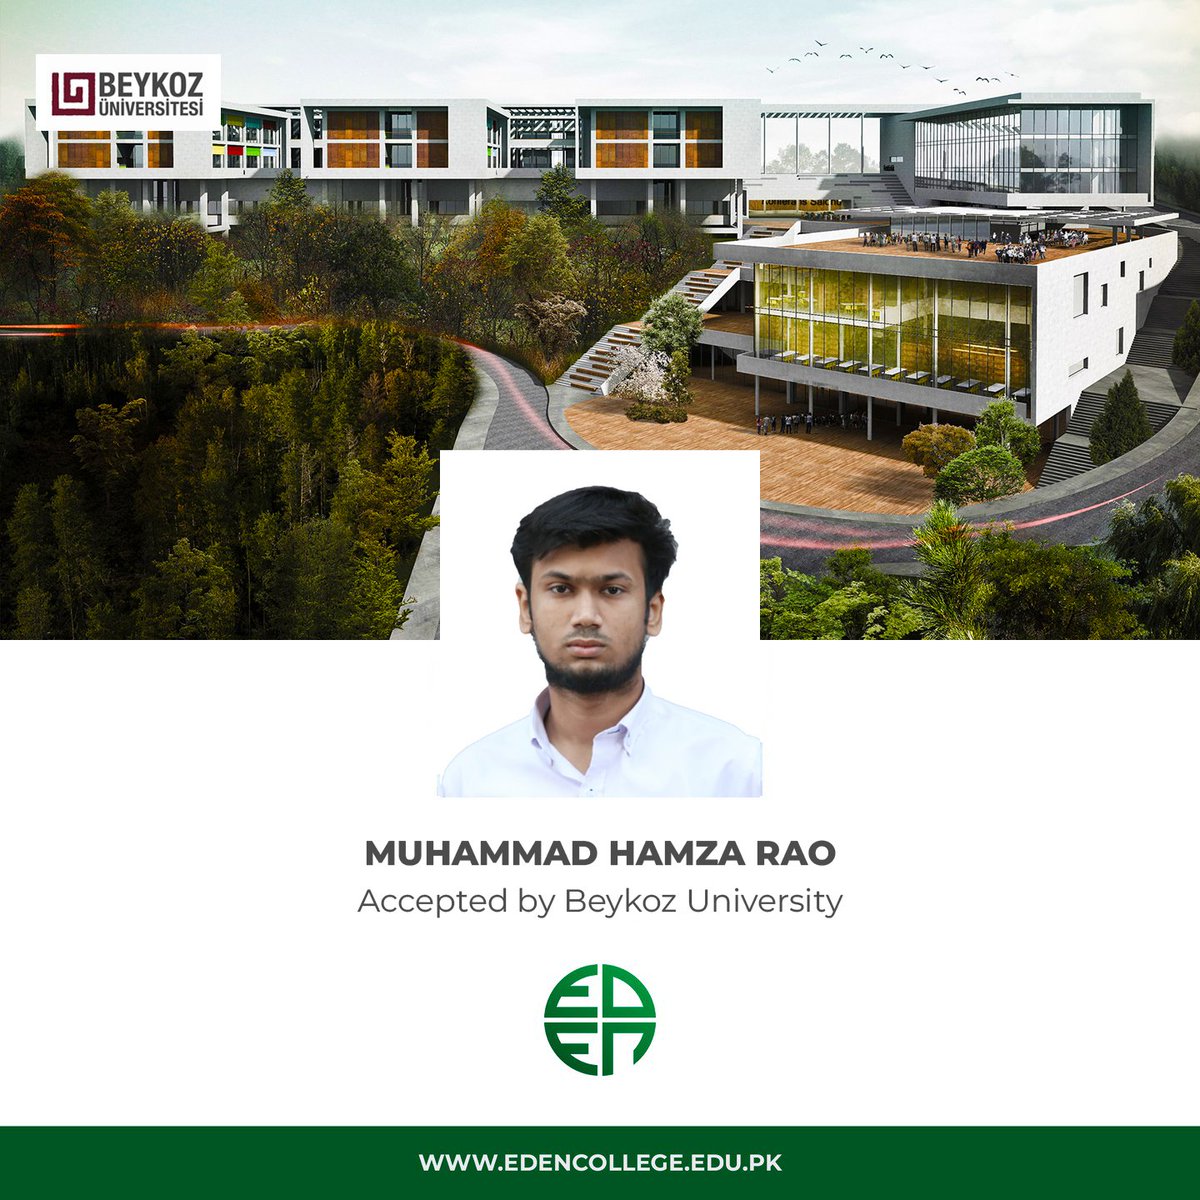 We are proud of our Vikings!
Eden College congratulates Muhammad Hamza Rao on his university acceptance.
Forward & Onwards!

#uniacceptance #UniversityPlacements #congrats #ForwardAndOnwards #karachialevels #karachi #EdenCollegePK #EdenCollege #beykozüniversitesi #beykoz #vikings